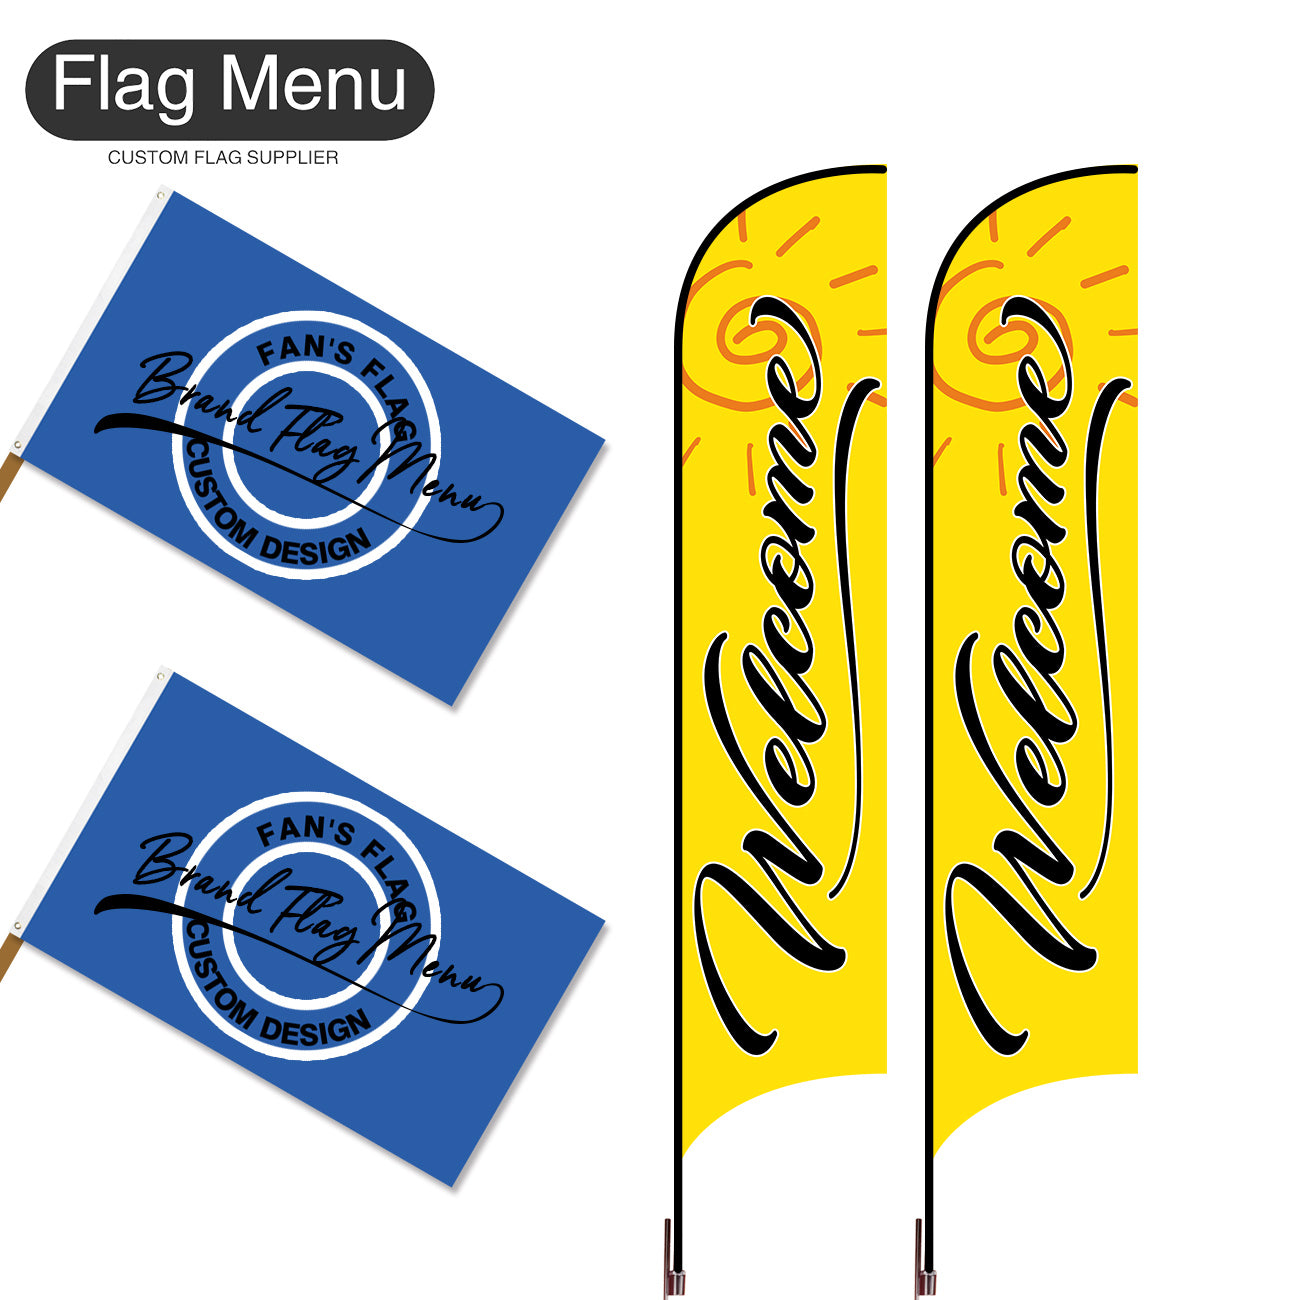 Outdoor Advertising Set - D-Yellow B-S - Feather Flag -Double Sided & 3'x5' Regular Flag -Single Sided-Cross & Water Bag-Flag Menu